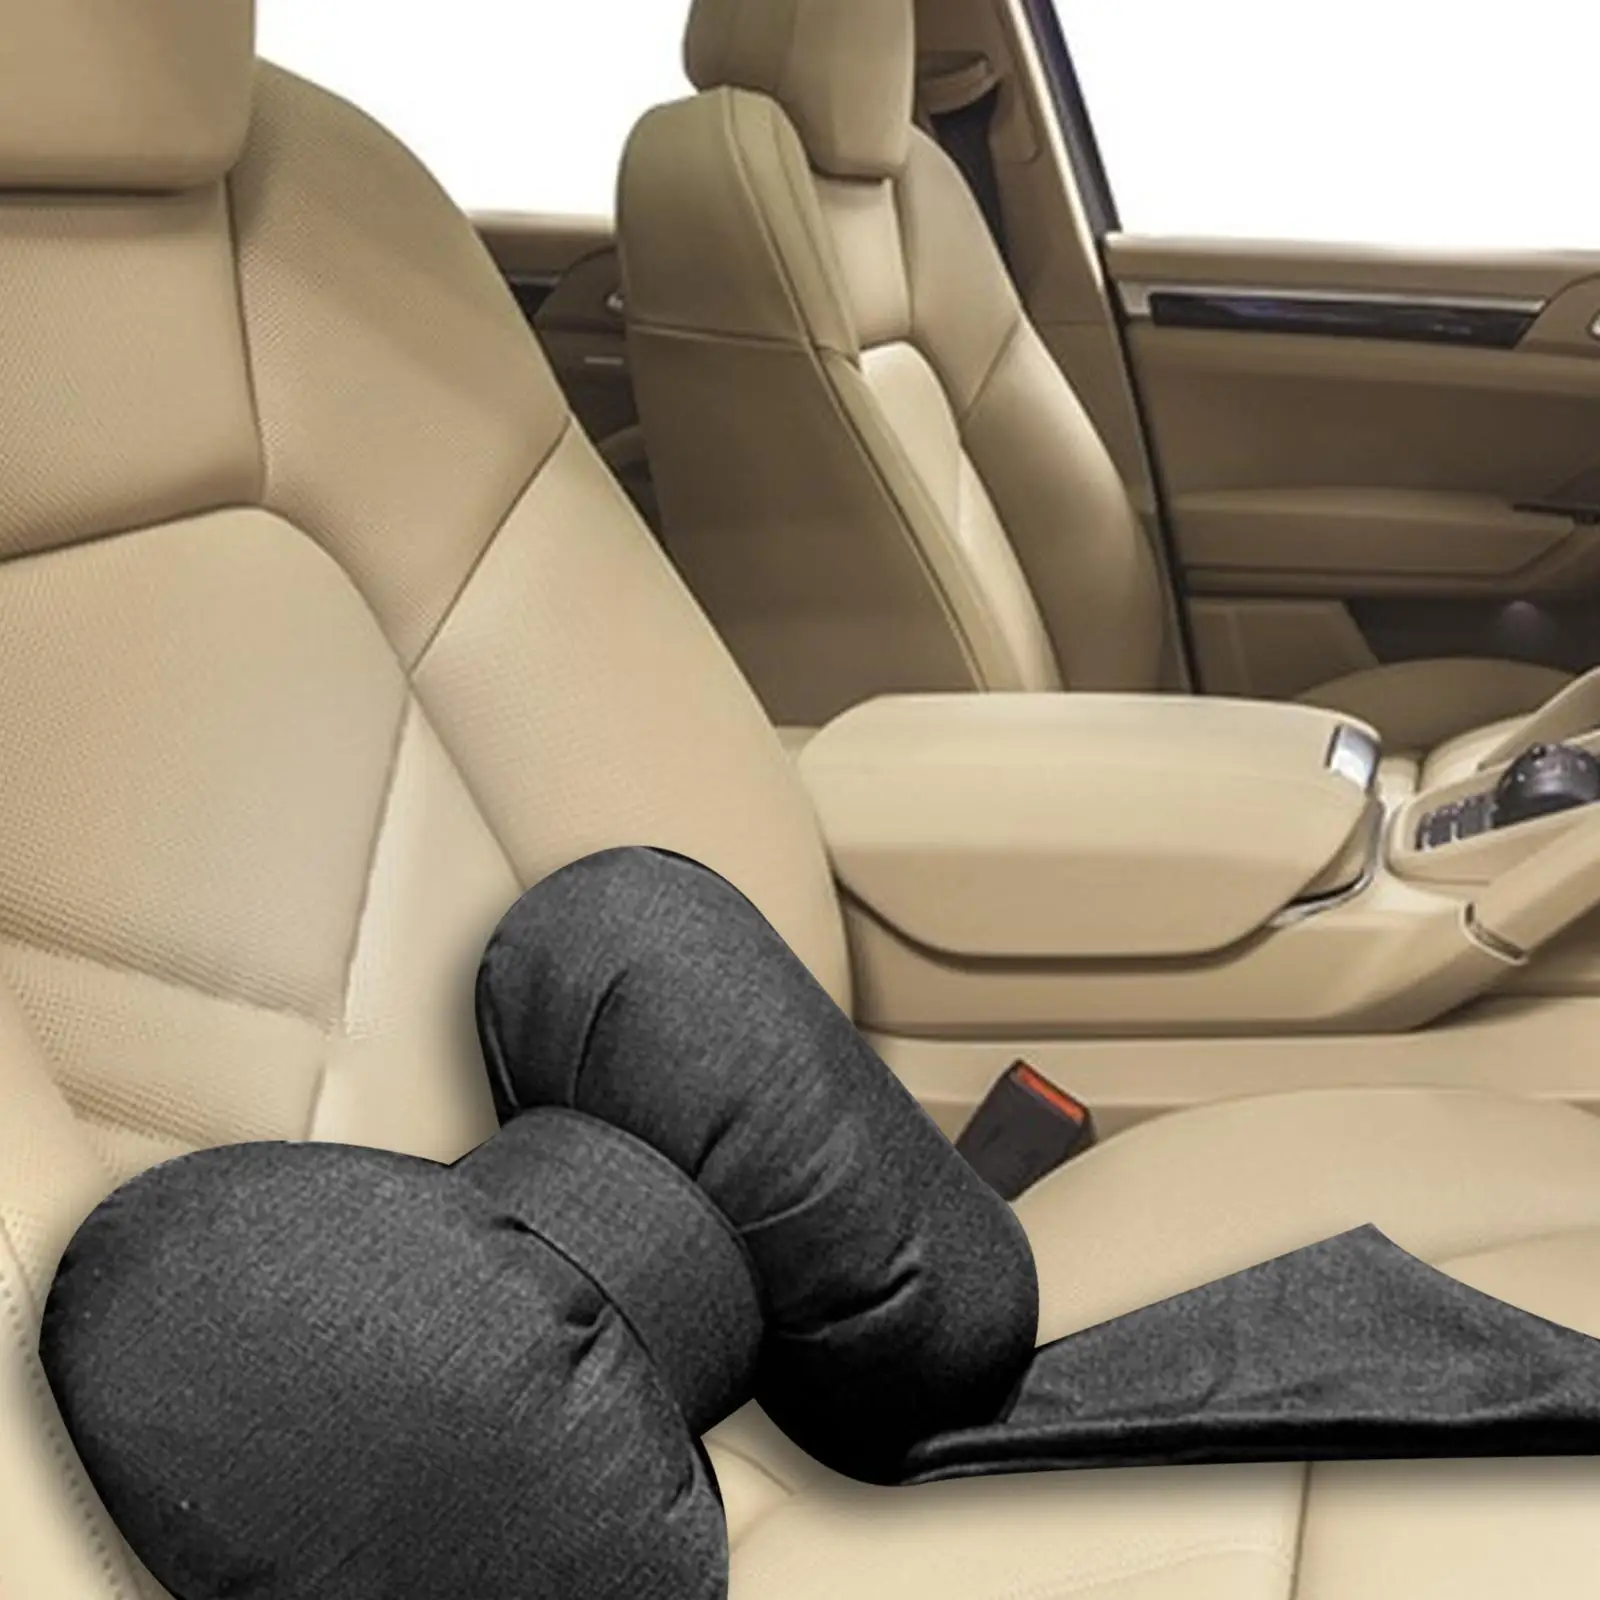 Car Lumbar Support Back Support Comfortable for Travel Car Driving Home